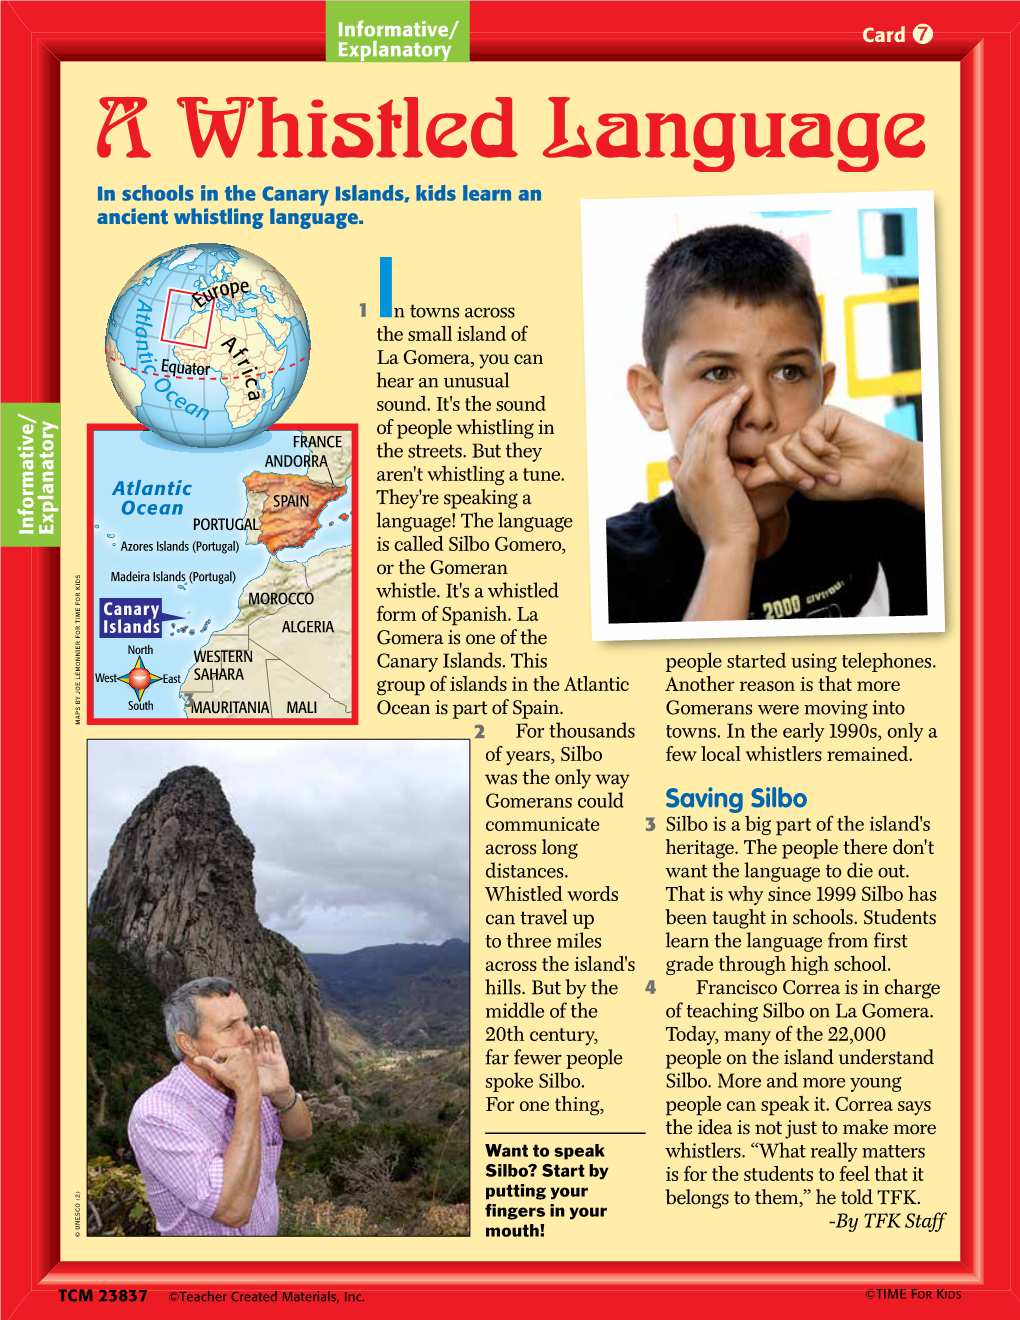 A Whistled Language in Schools in the Canary Islands, Kids Learn an Ancient Whistling Language